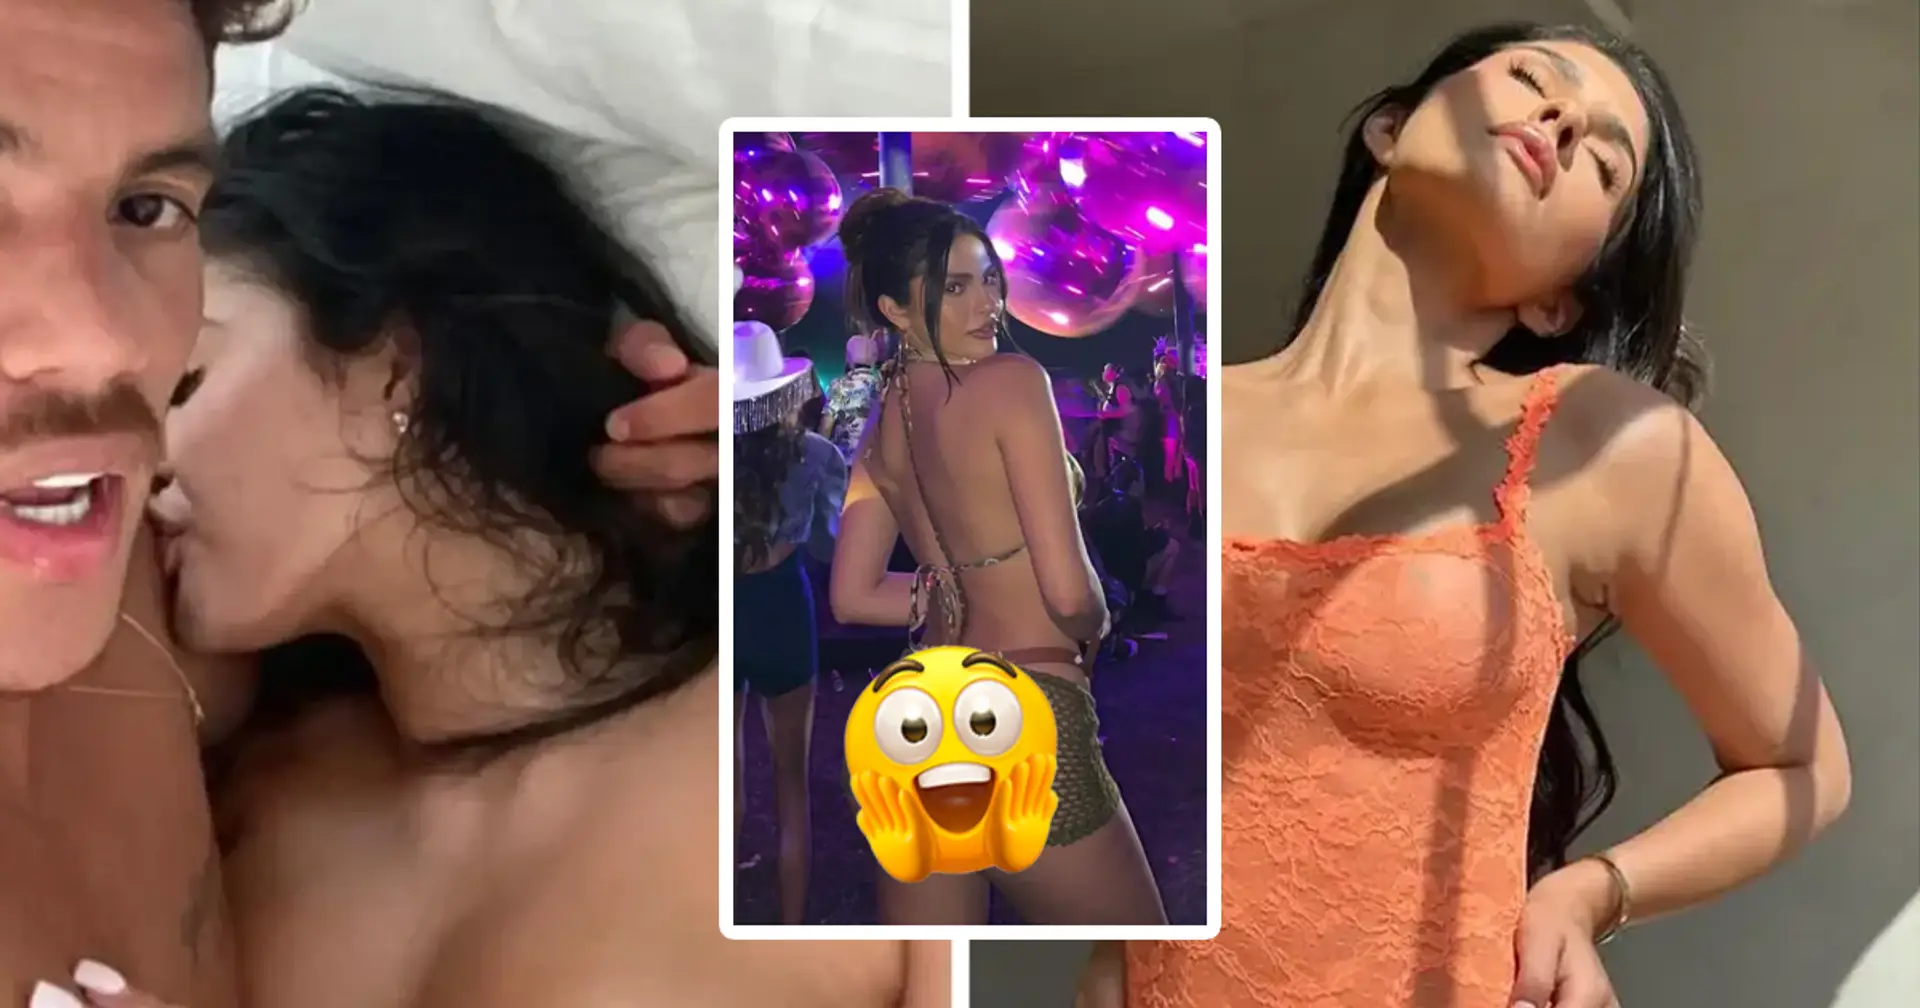 Barcelona ex-player lit up a 'spicy' photo of his girlfriend in his stories – now she is popular at OnlyFans